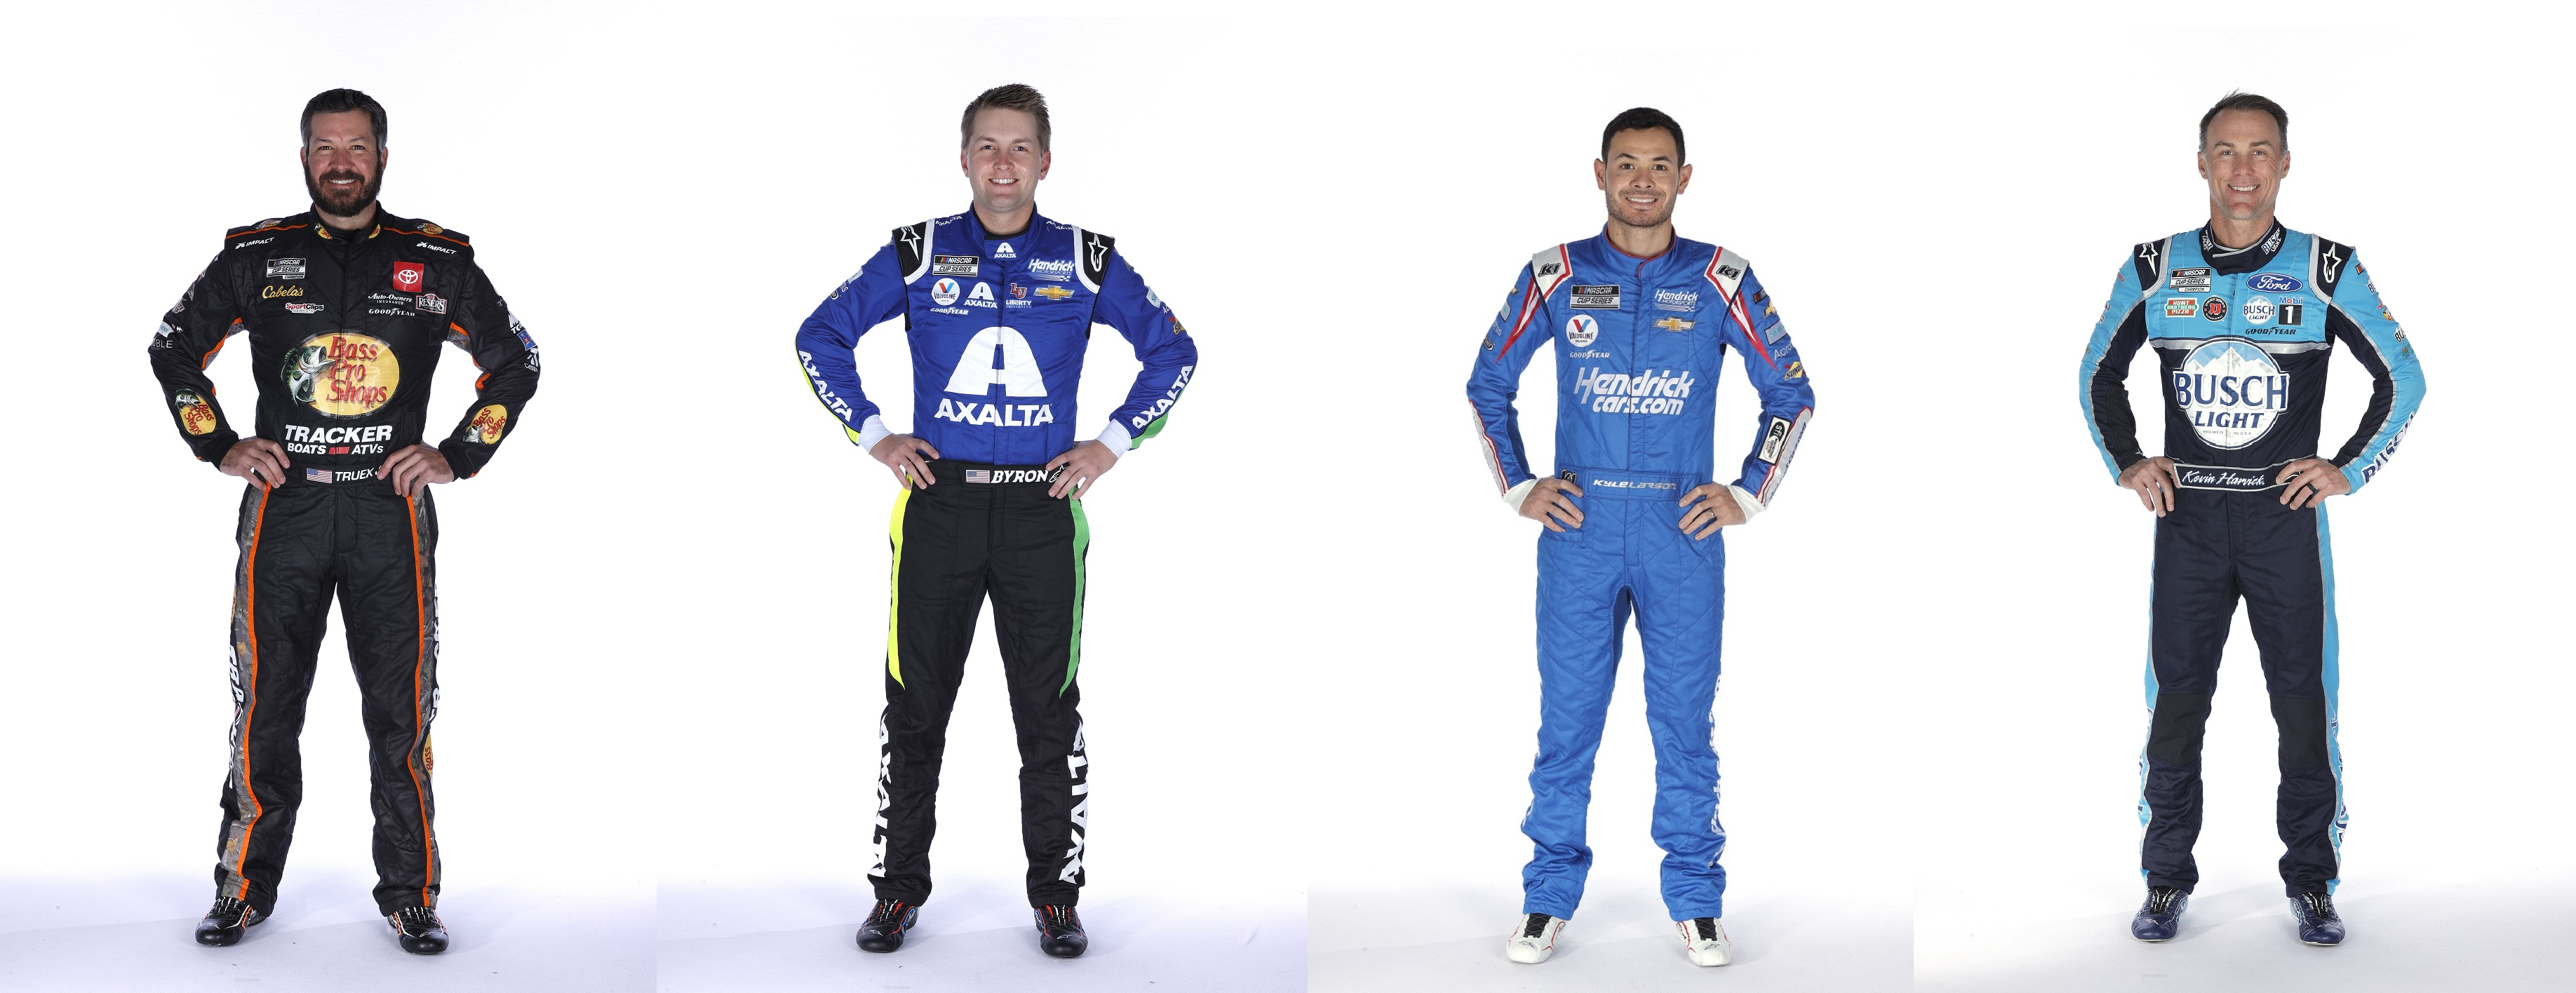 Introducing the fab four for Sunday night's Cook Out Southern 500 at Darlington.